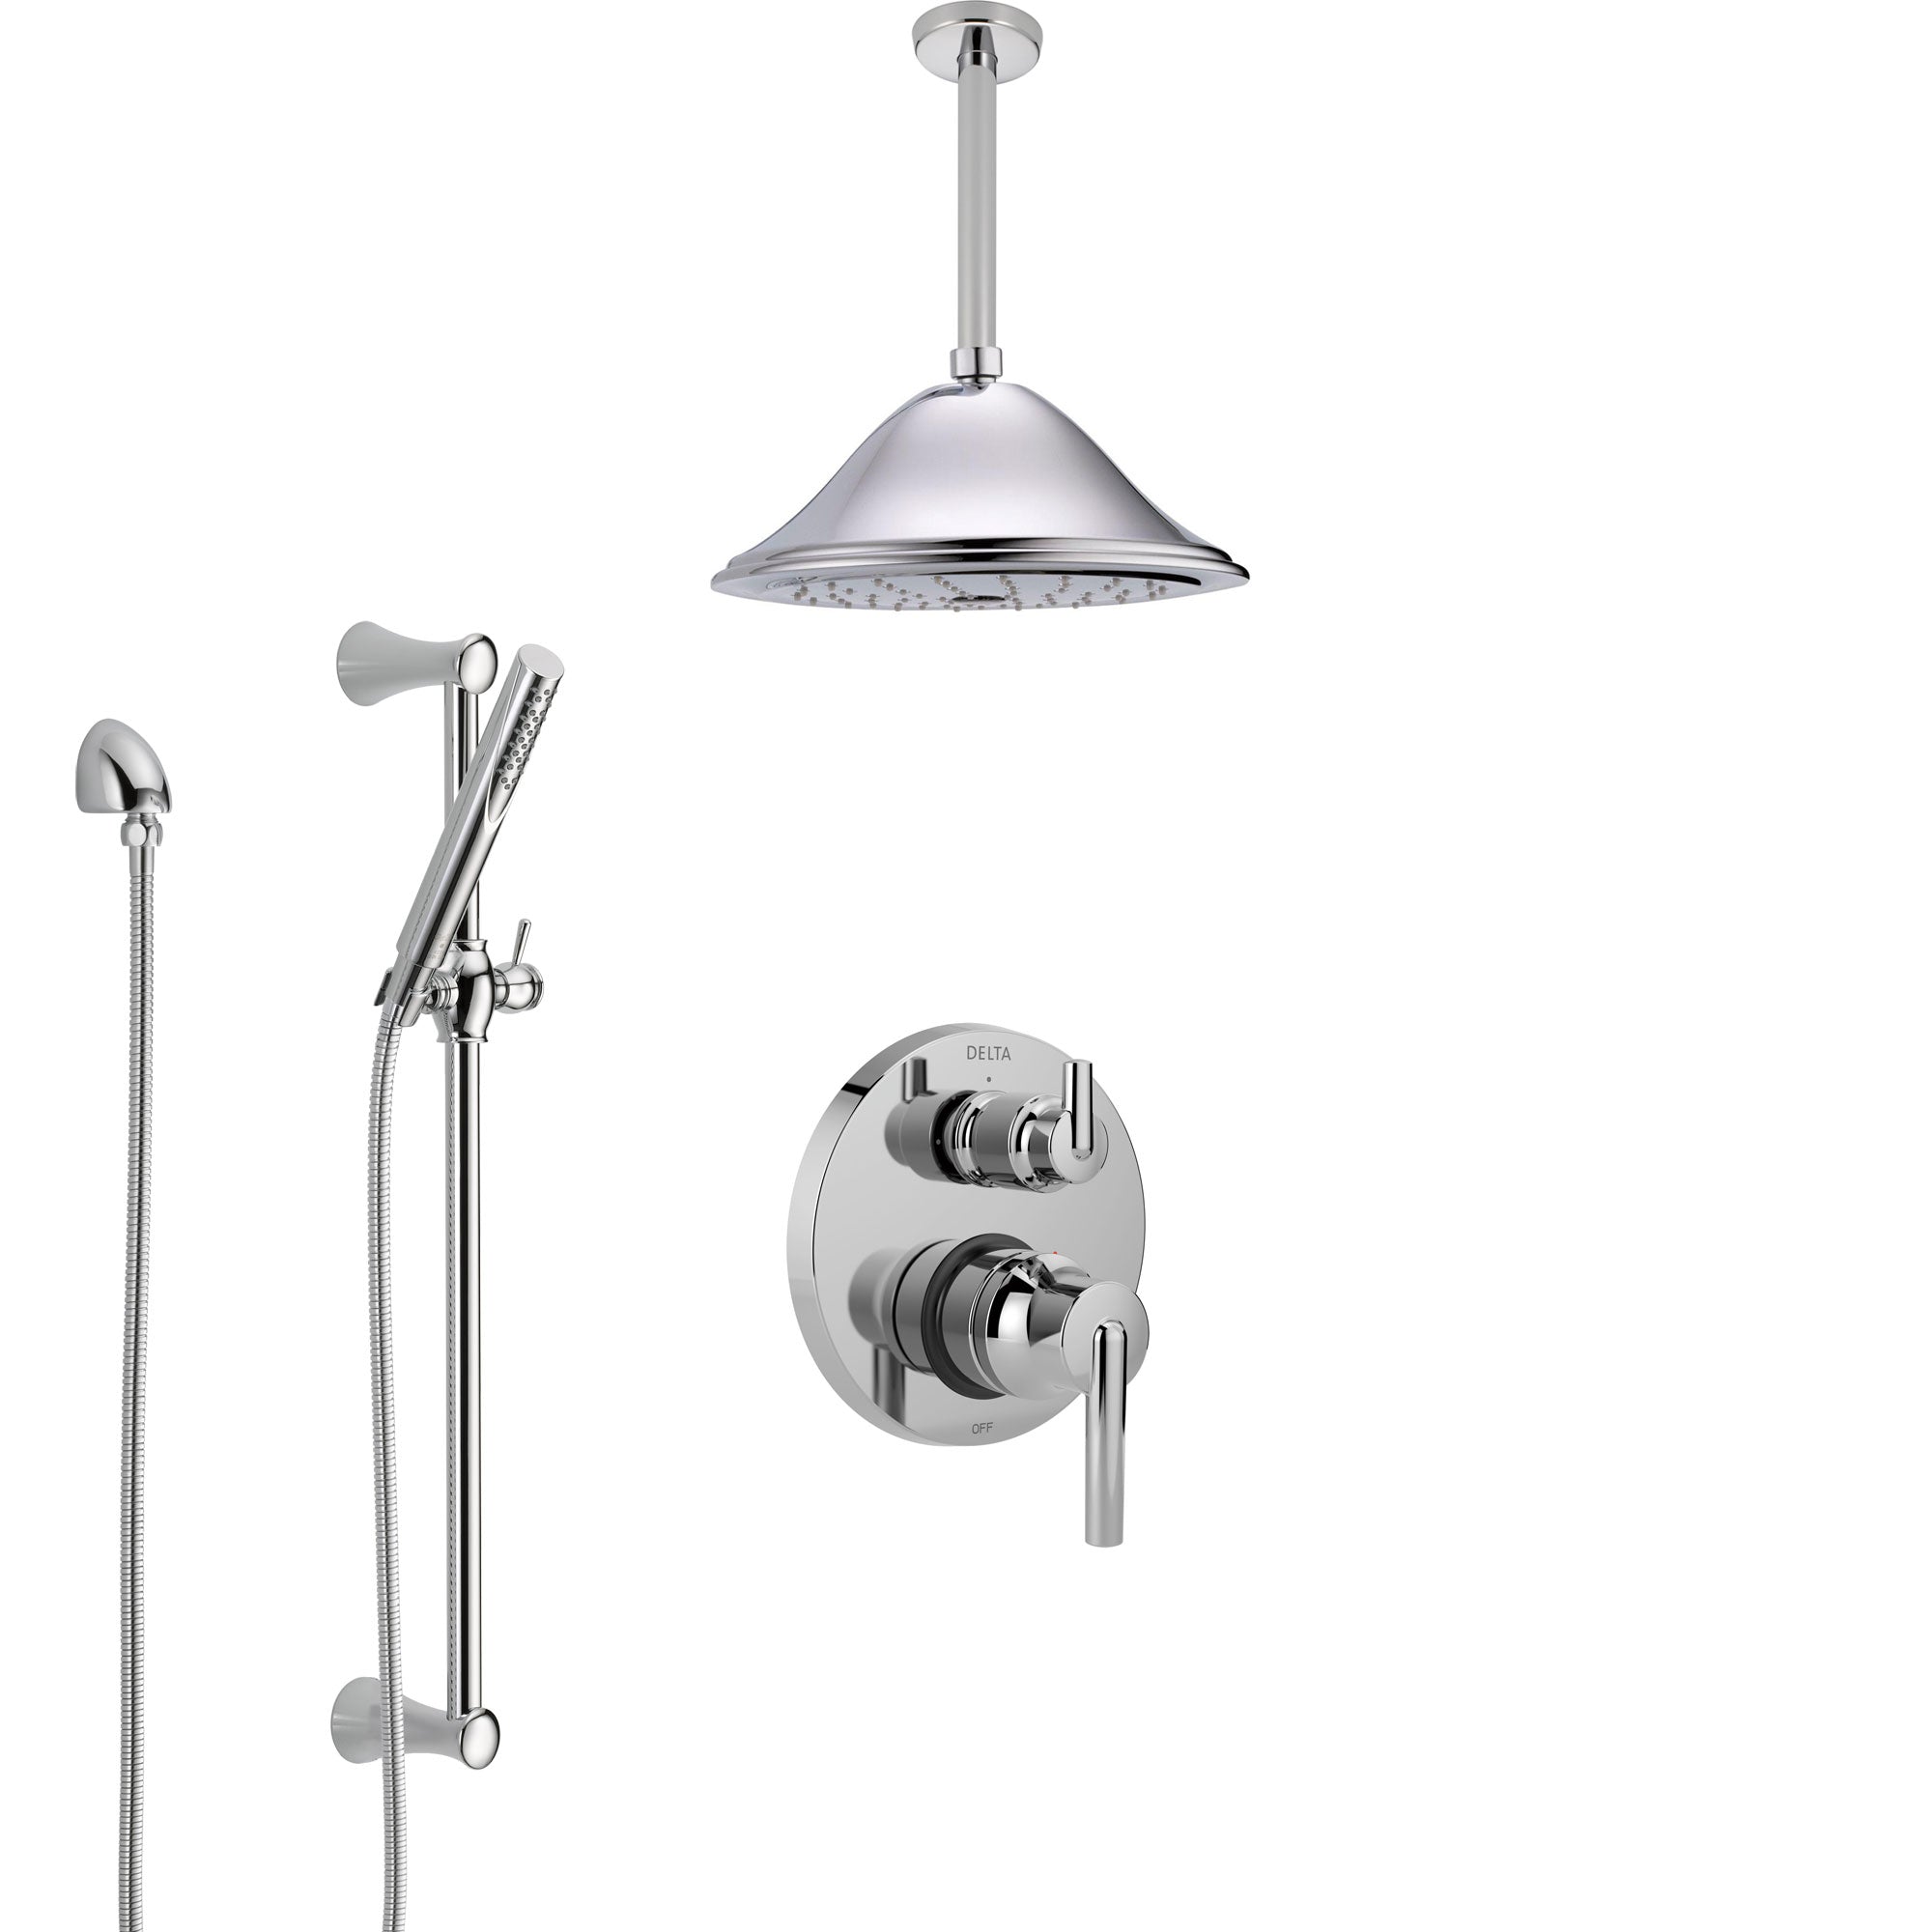 Delta Trinsic Chrome Finish Shower System with Control Handle, Integrated Diverter, Ceiling Mount Showerhead, and Hand Shower with Slidebar SS248592